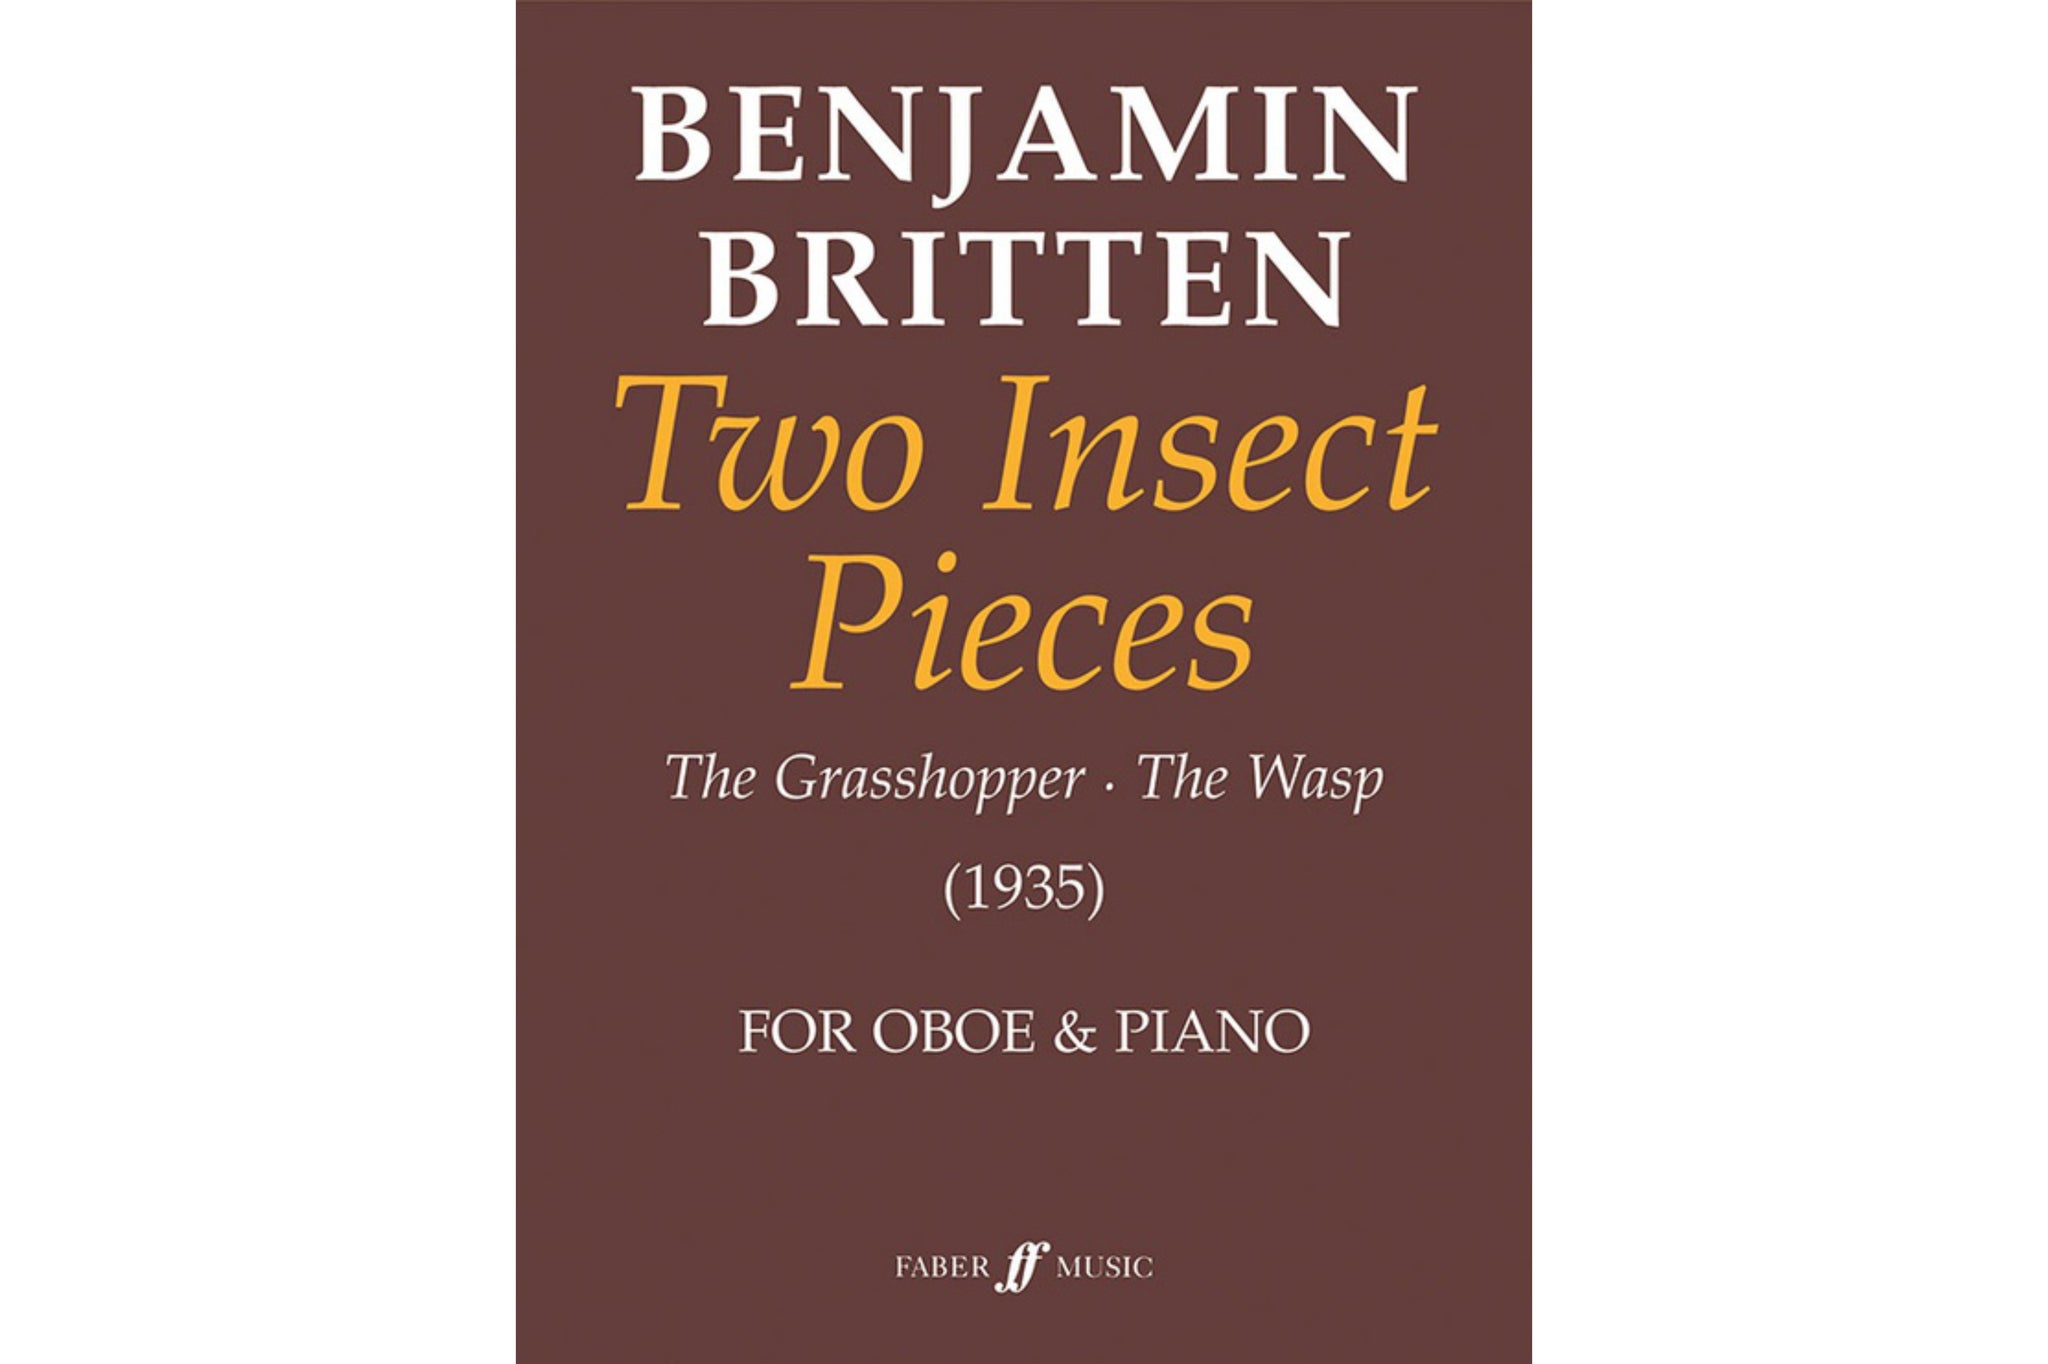 BRITTEN TWO INSECT PIECES